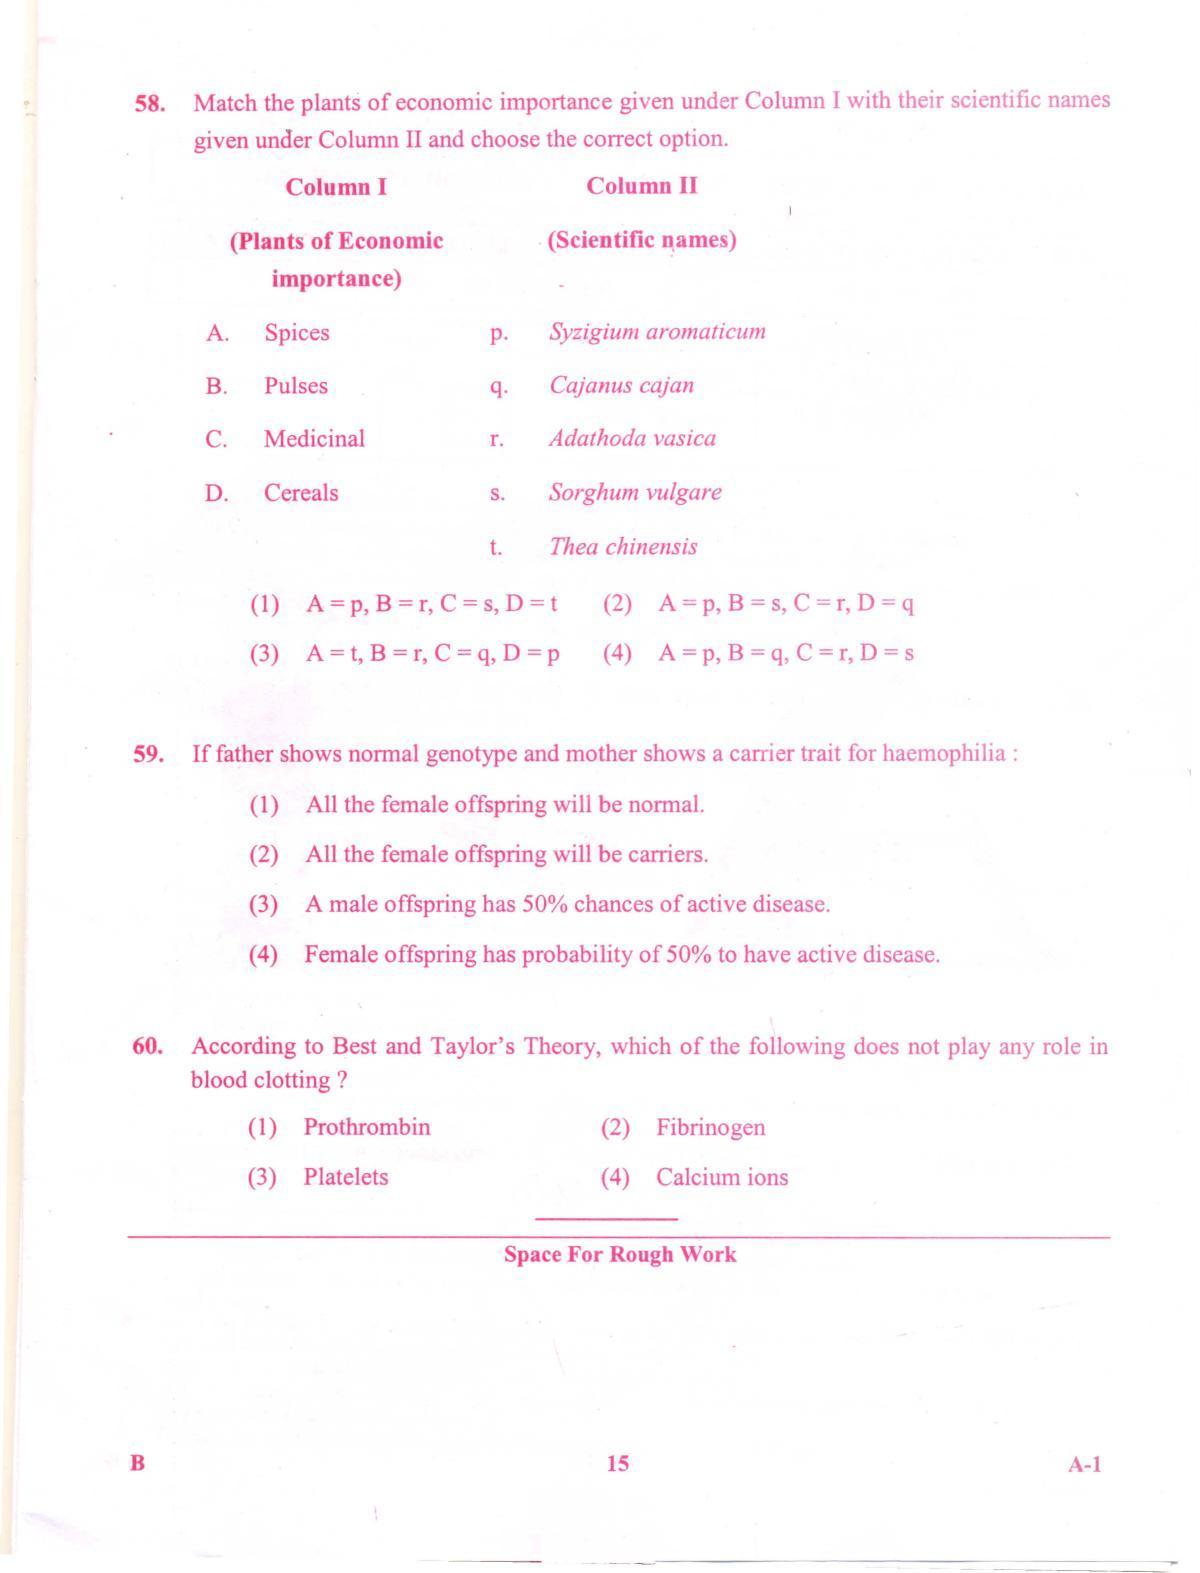 KCET Biology 2012 Question Papers - Page 15